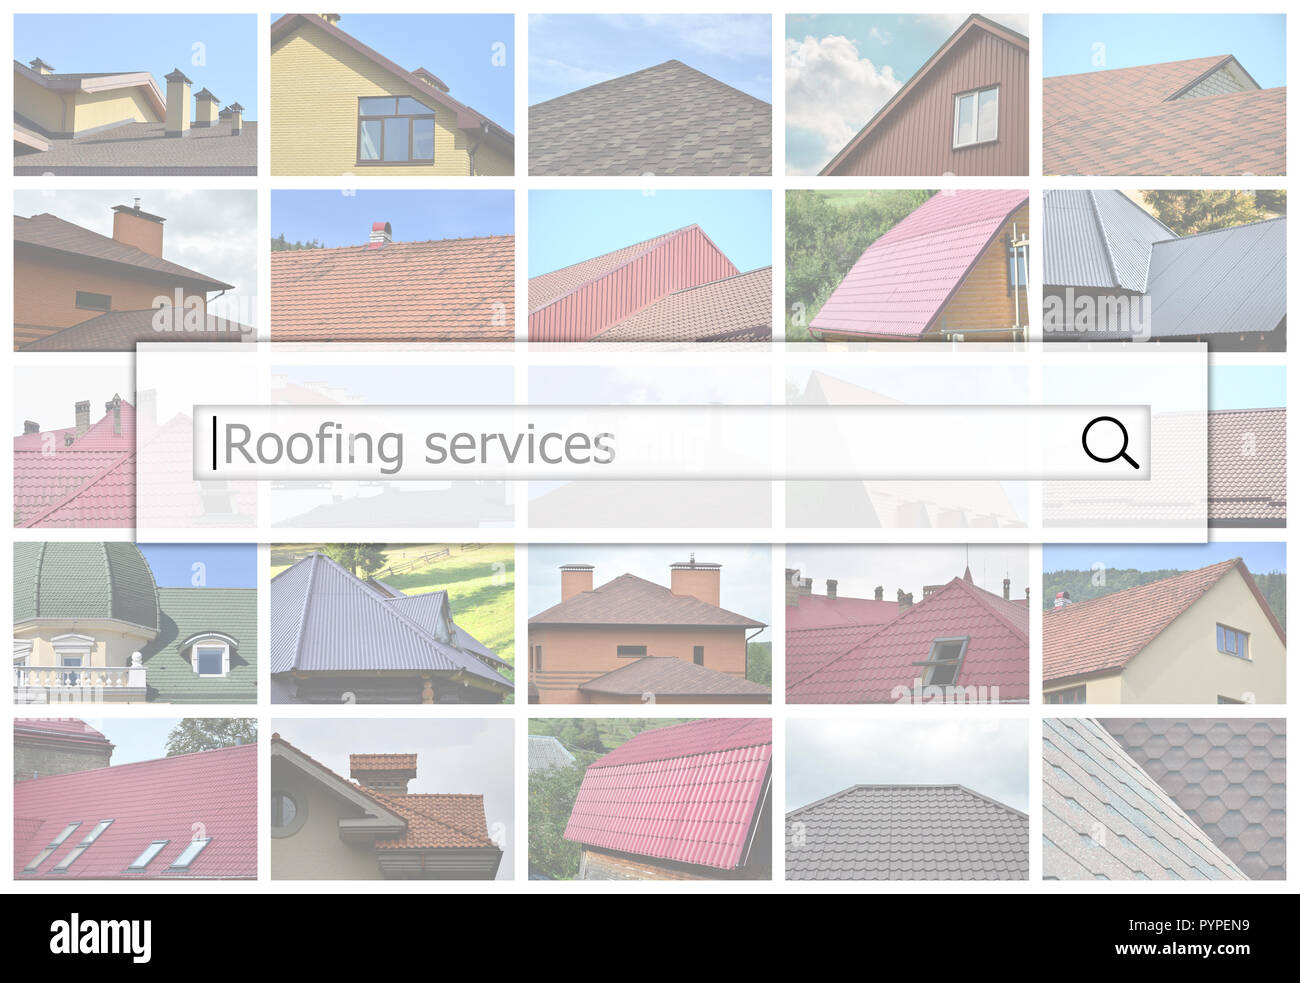 bote tourt roofing<br>Roofing